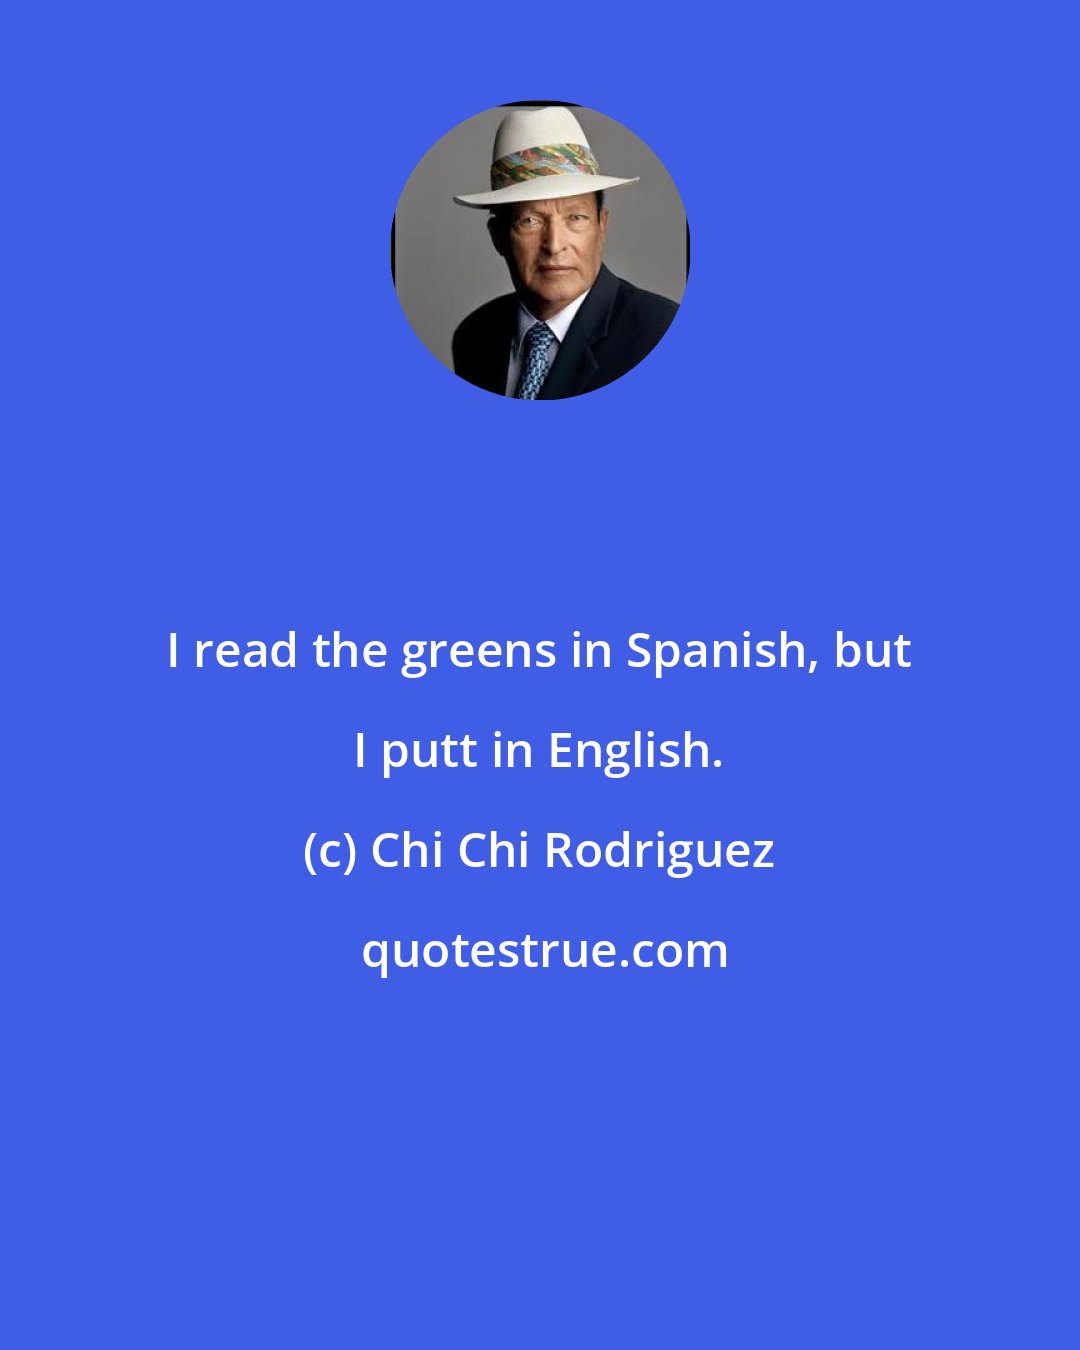 Chi Chi Rodriguez: I read the greens in Spanish, but I putt in English.